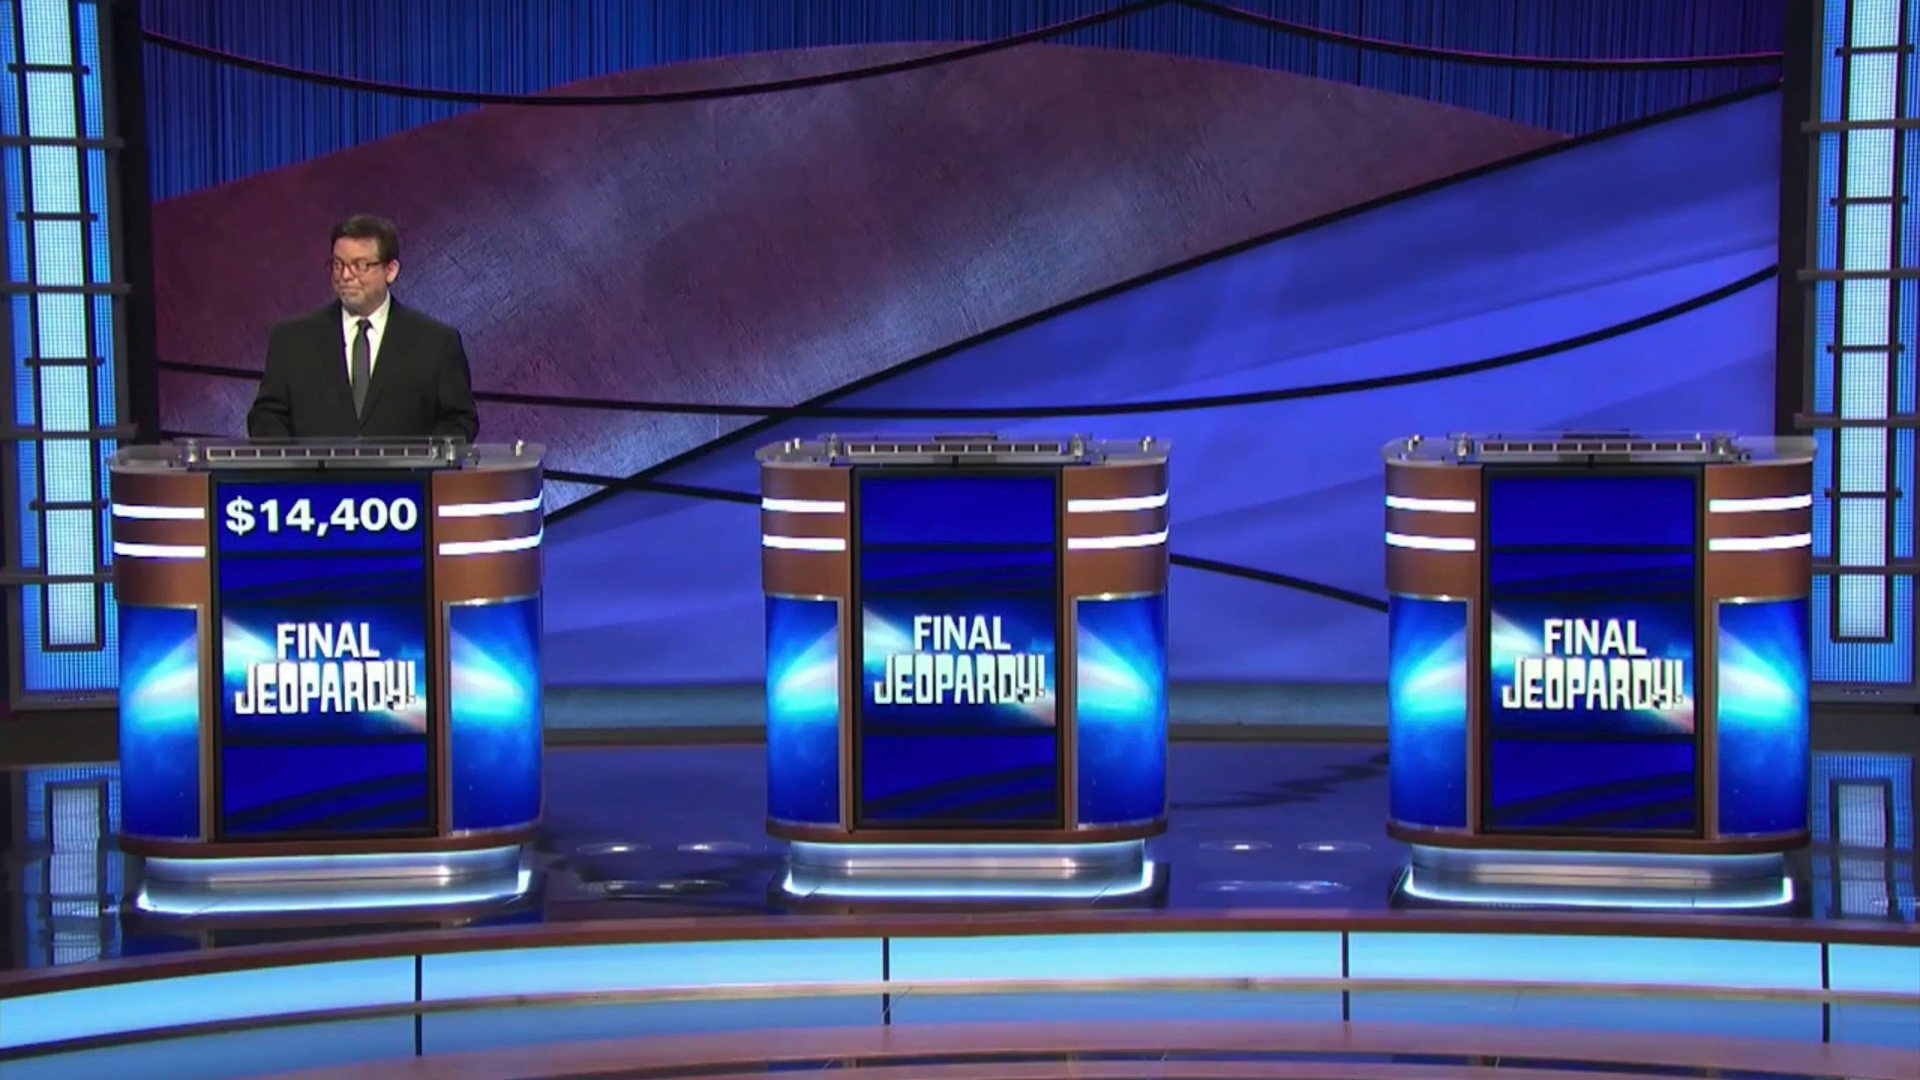 Super rare Final Jeopardy! has fans asking if history was made